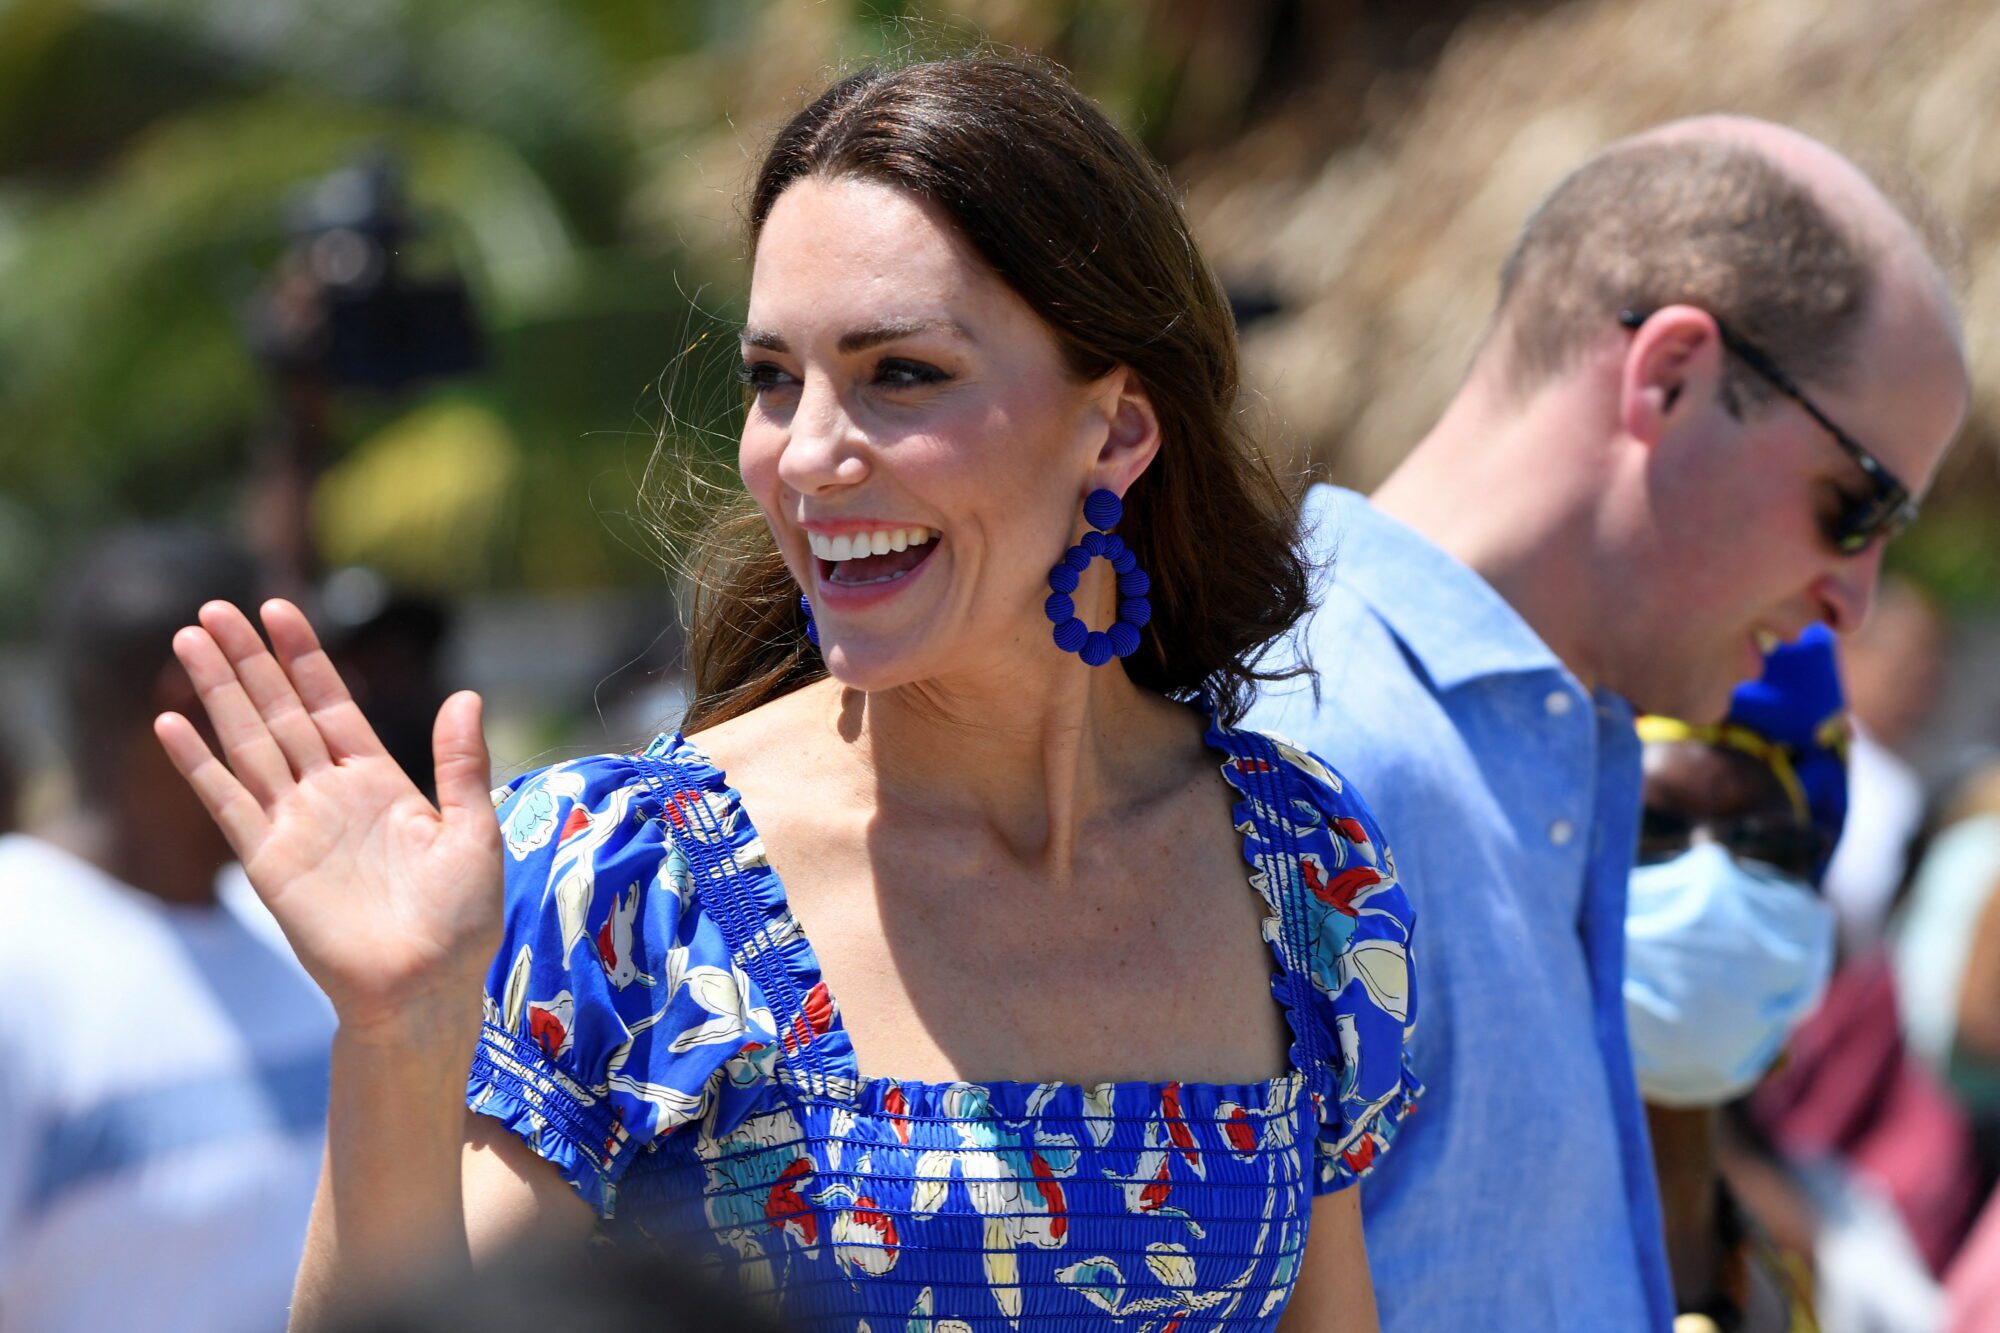 Britain's Catherine, Duchess of Cambridge, visits the Garifuna community with Prince William, on the second day of their tour of the Caribbean, Hopkins, Belize, March 20, 2022.  REUTERS/Toby Melville